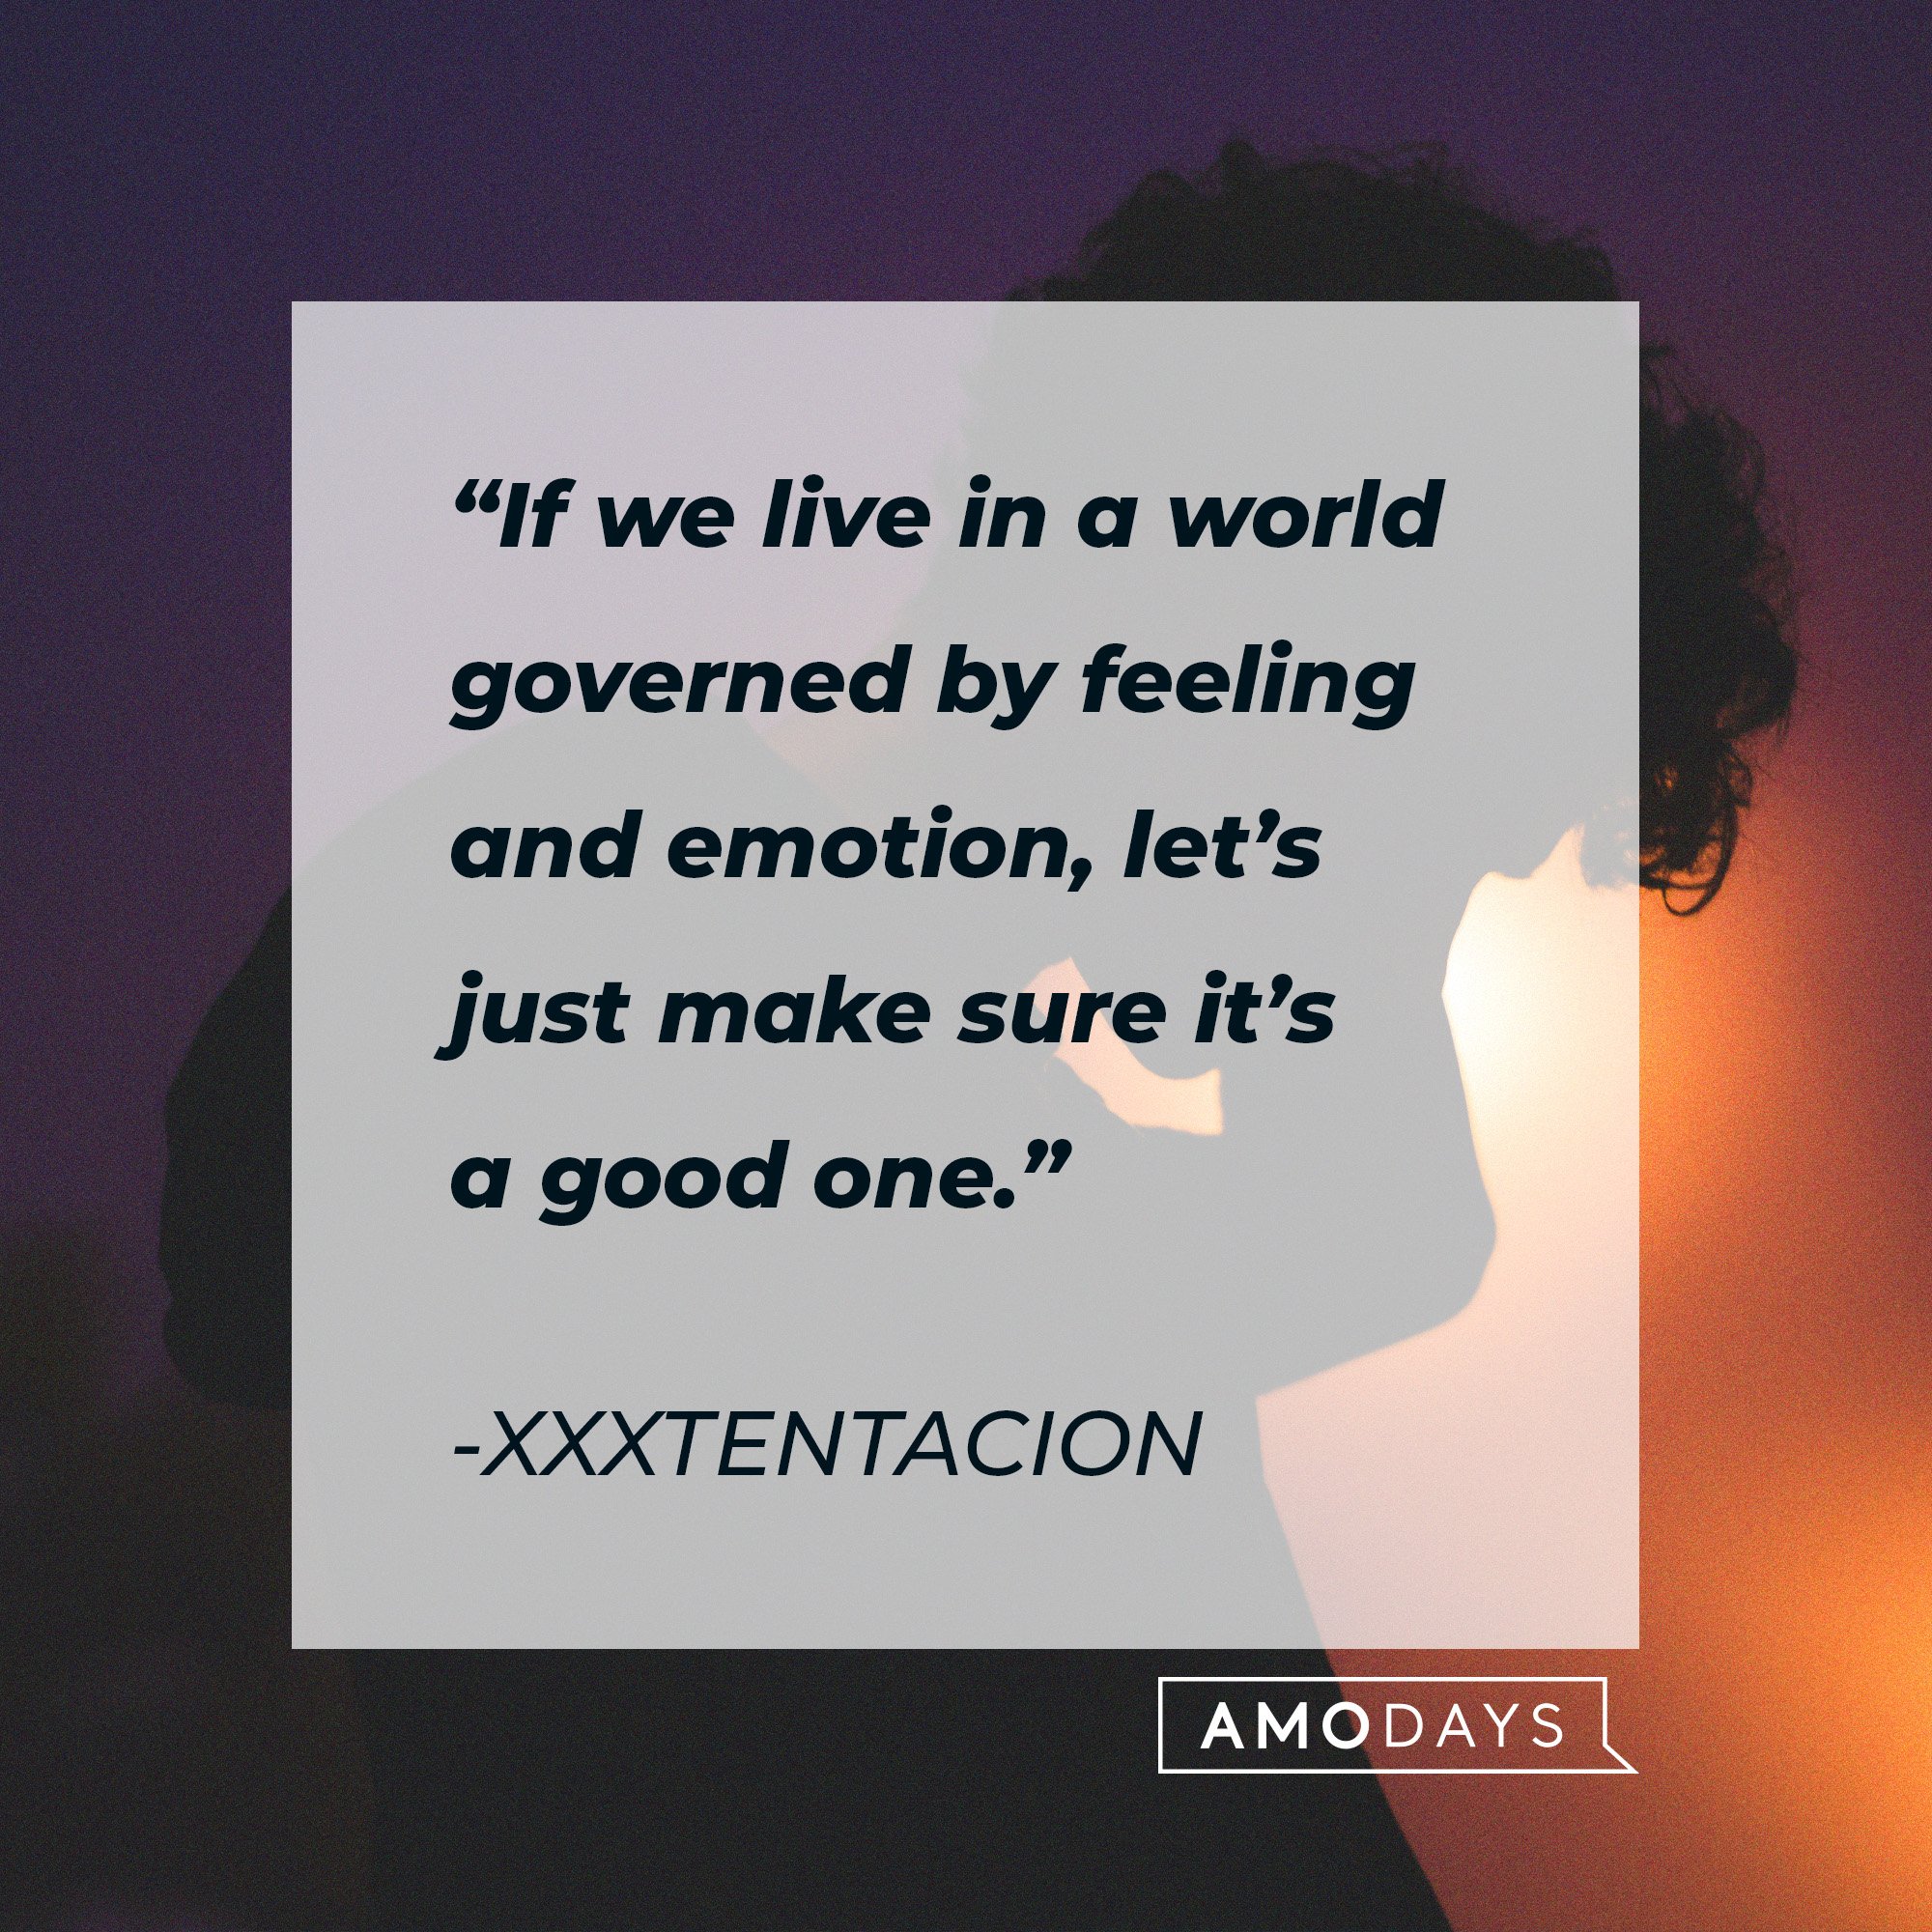 Xxxtentacion’s quote: “If we live in a world governed by feeling and emotion, let’s just make sure it’s a good one.” | Image: AmoDays